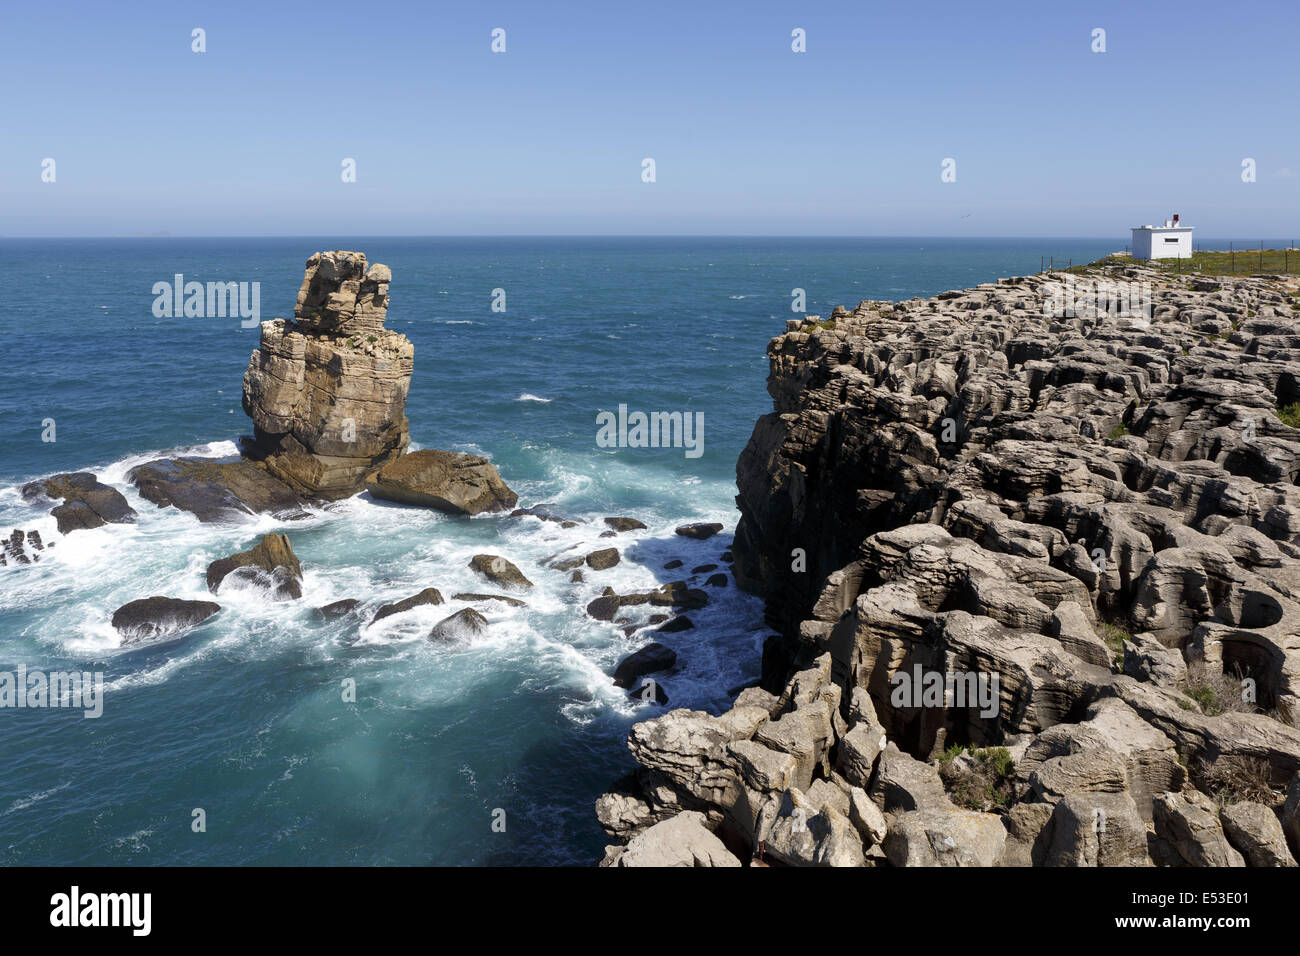 Cabo Carvoeiro lies at the westernmost point of the Peniche peninsula, next to the Atlantic ocean, in the Peniche municipality Portugal Stock Photo